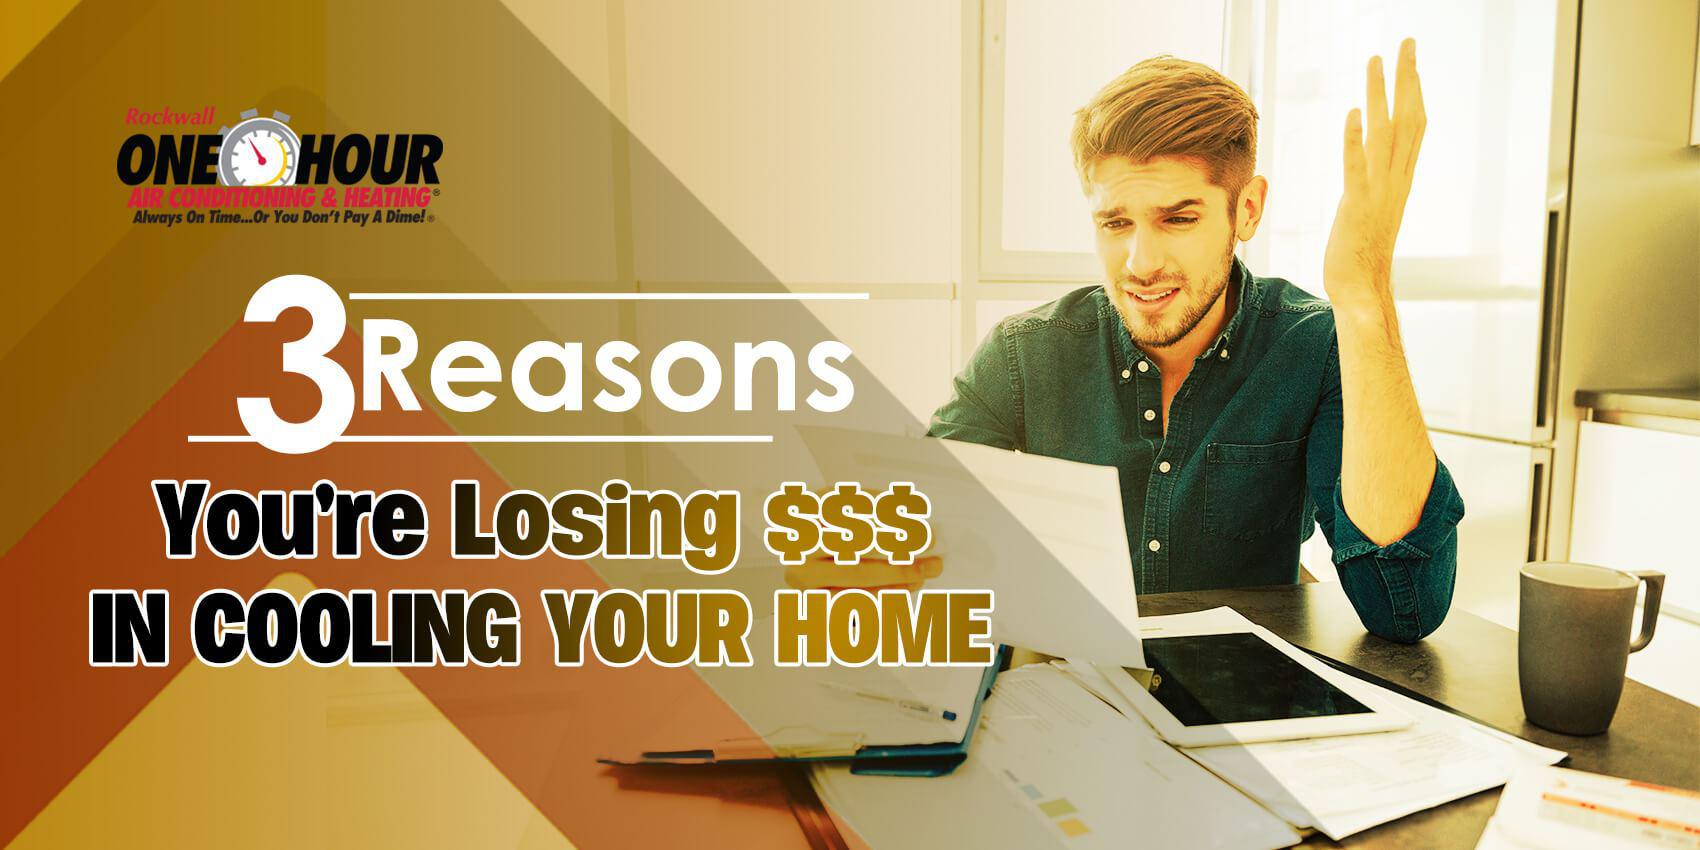 3 Reasons You’re Losing $$$ in Cooling Your Home